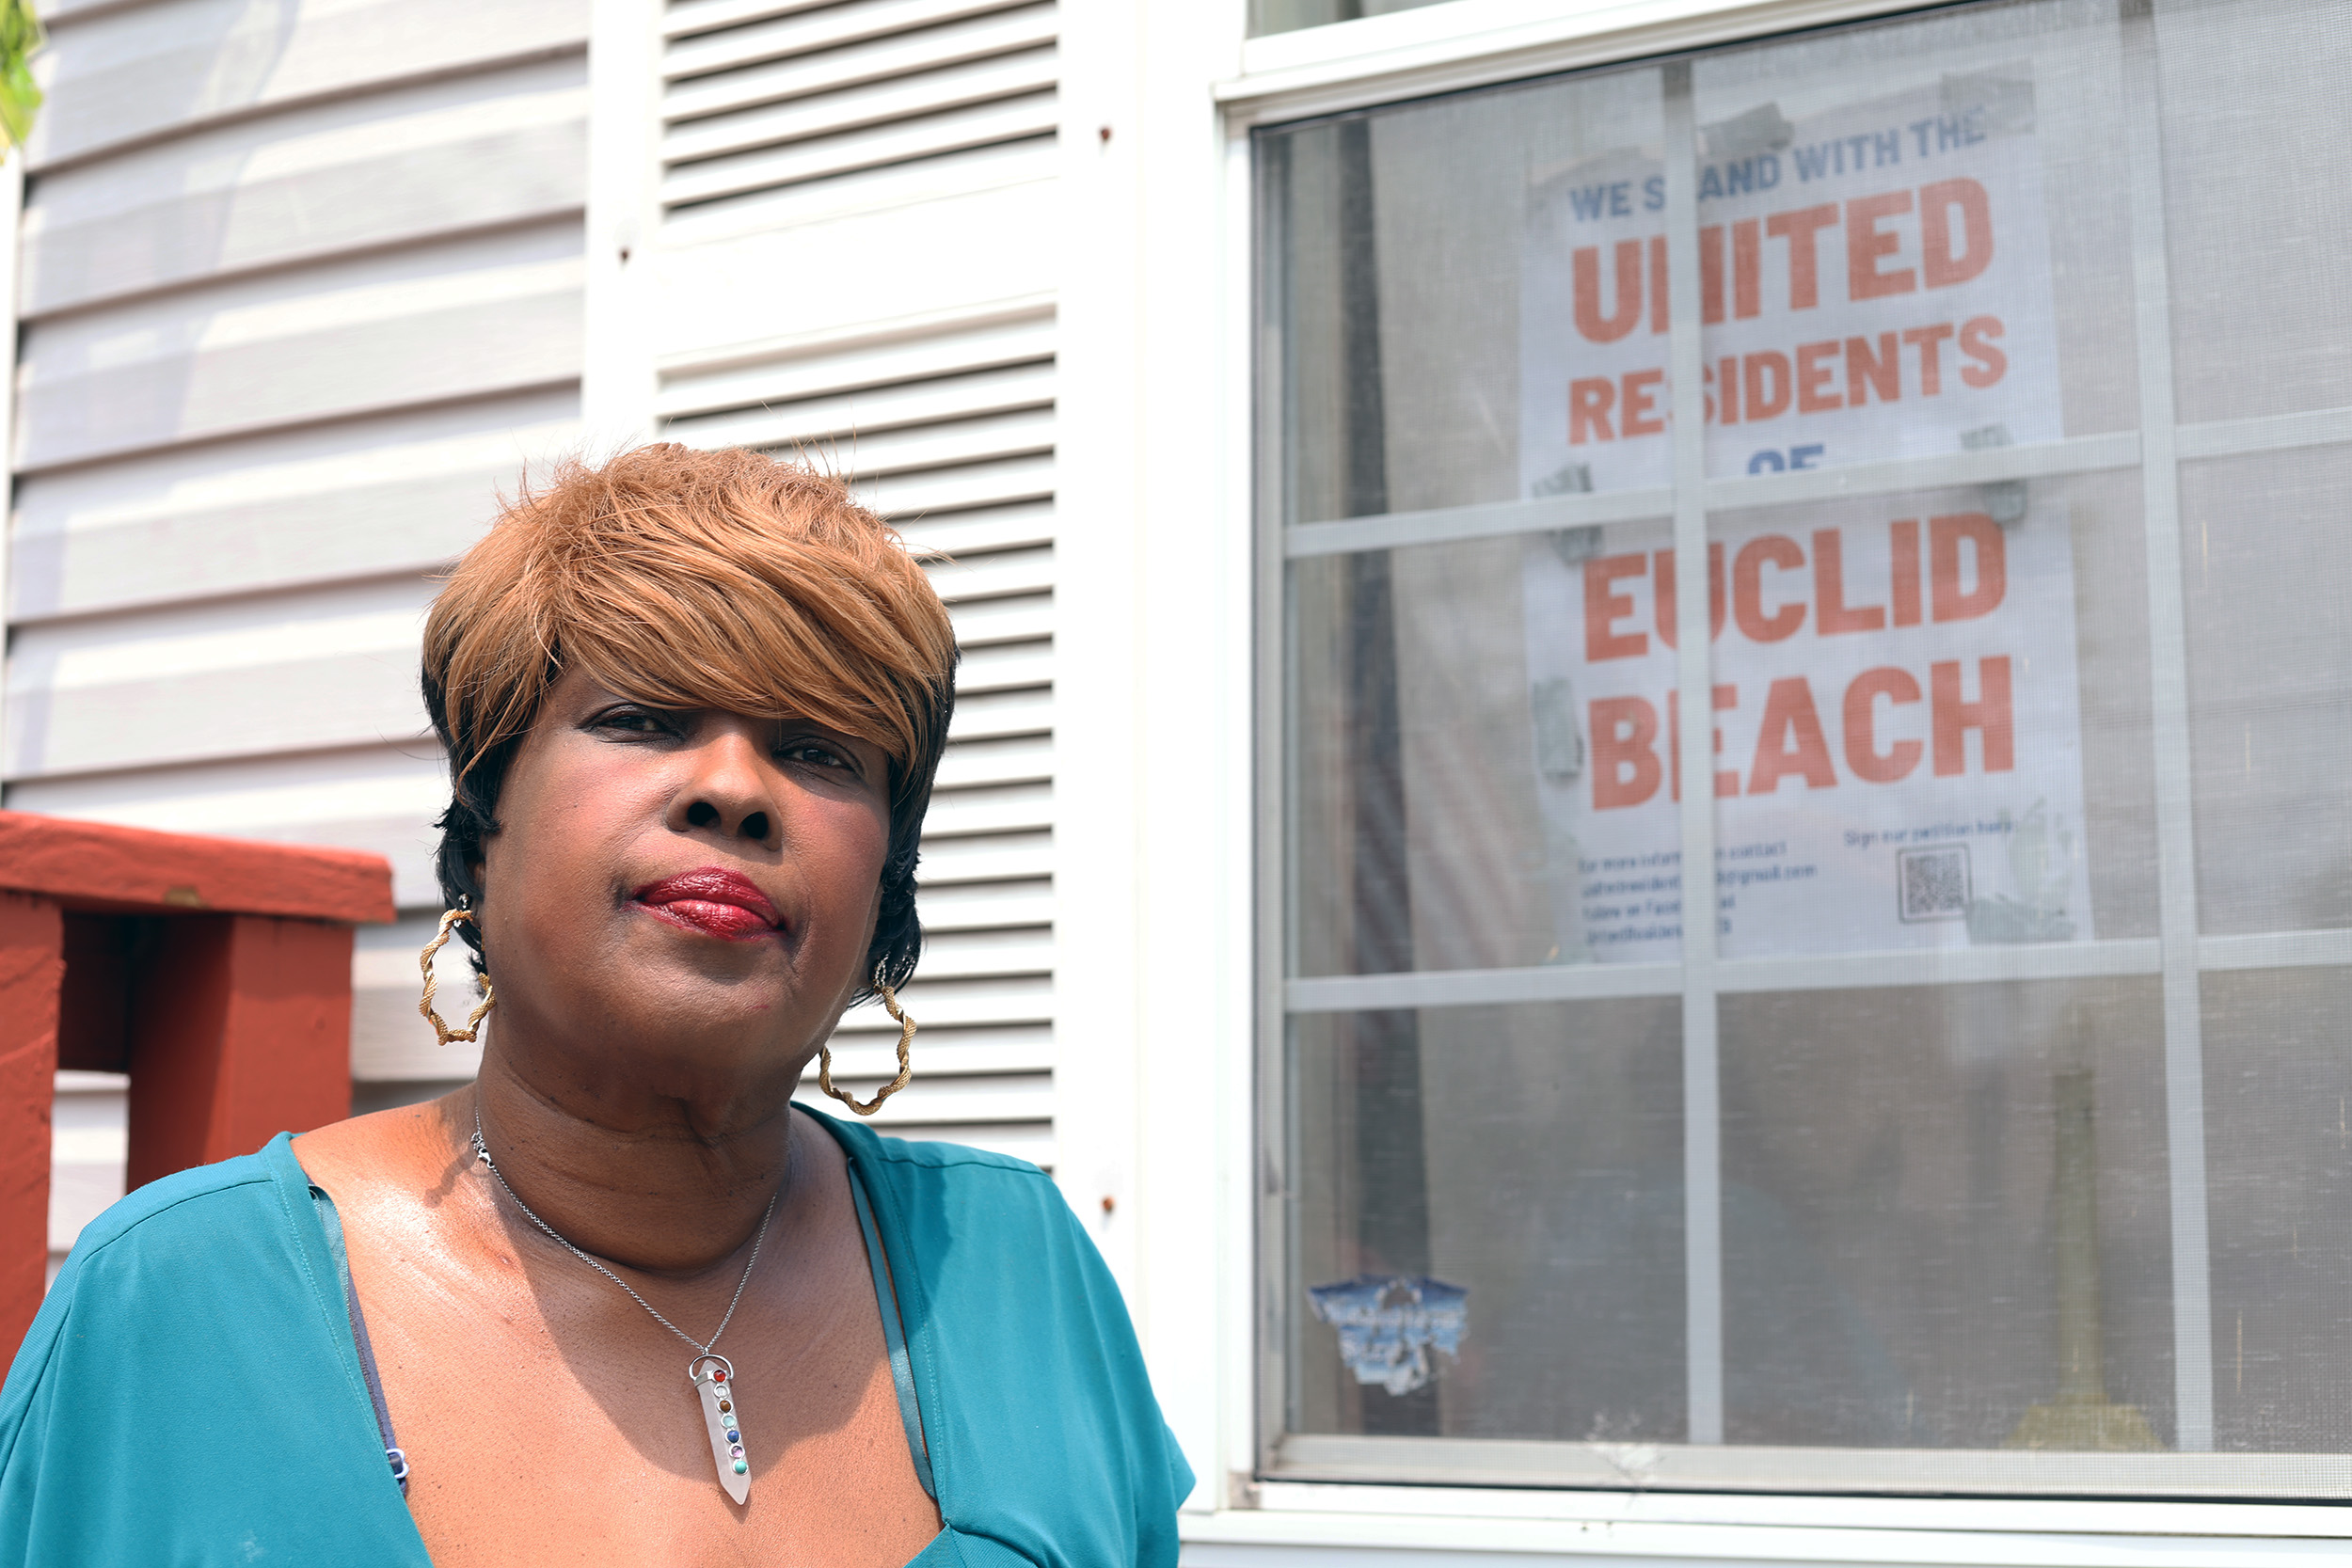 Carol McClain outside her home in Euclid Beach Mobile Home park. The Western Reserve Land Conservancy intends to close Euclid Beach Mobile Home park in the summer of 2024. The nonprofit will then give the land to Cleveland Metroparks, which will use it to upgrade and redevelop Euclid Beach Park into a major recreational attraction. Residents are fighting to keep their affordable housing near Lake Erie.